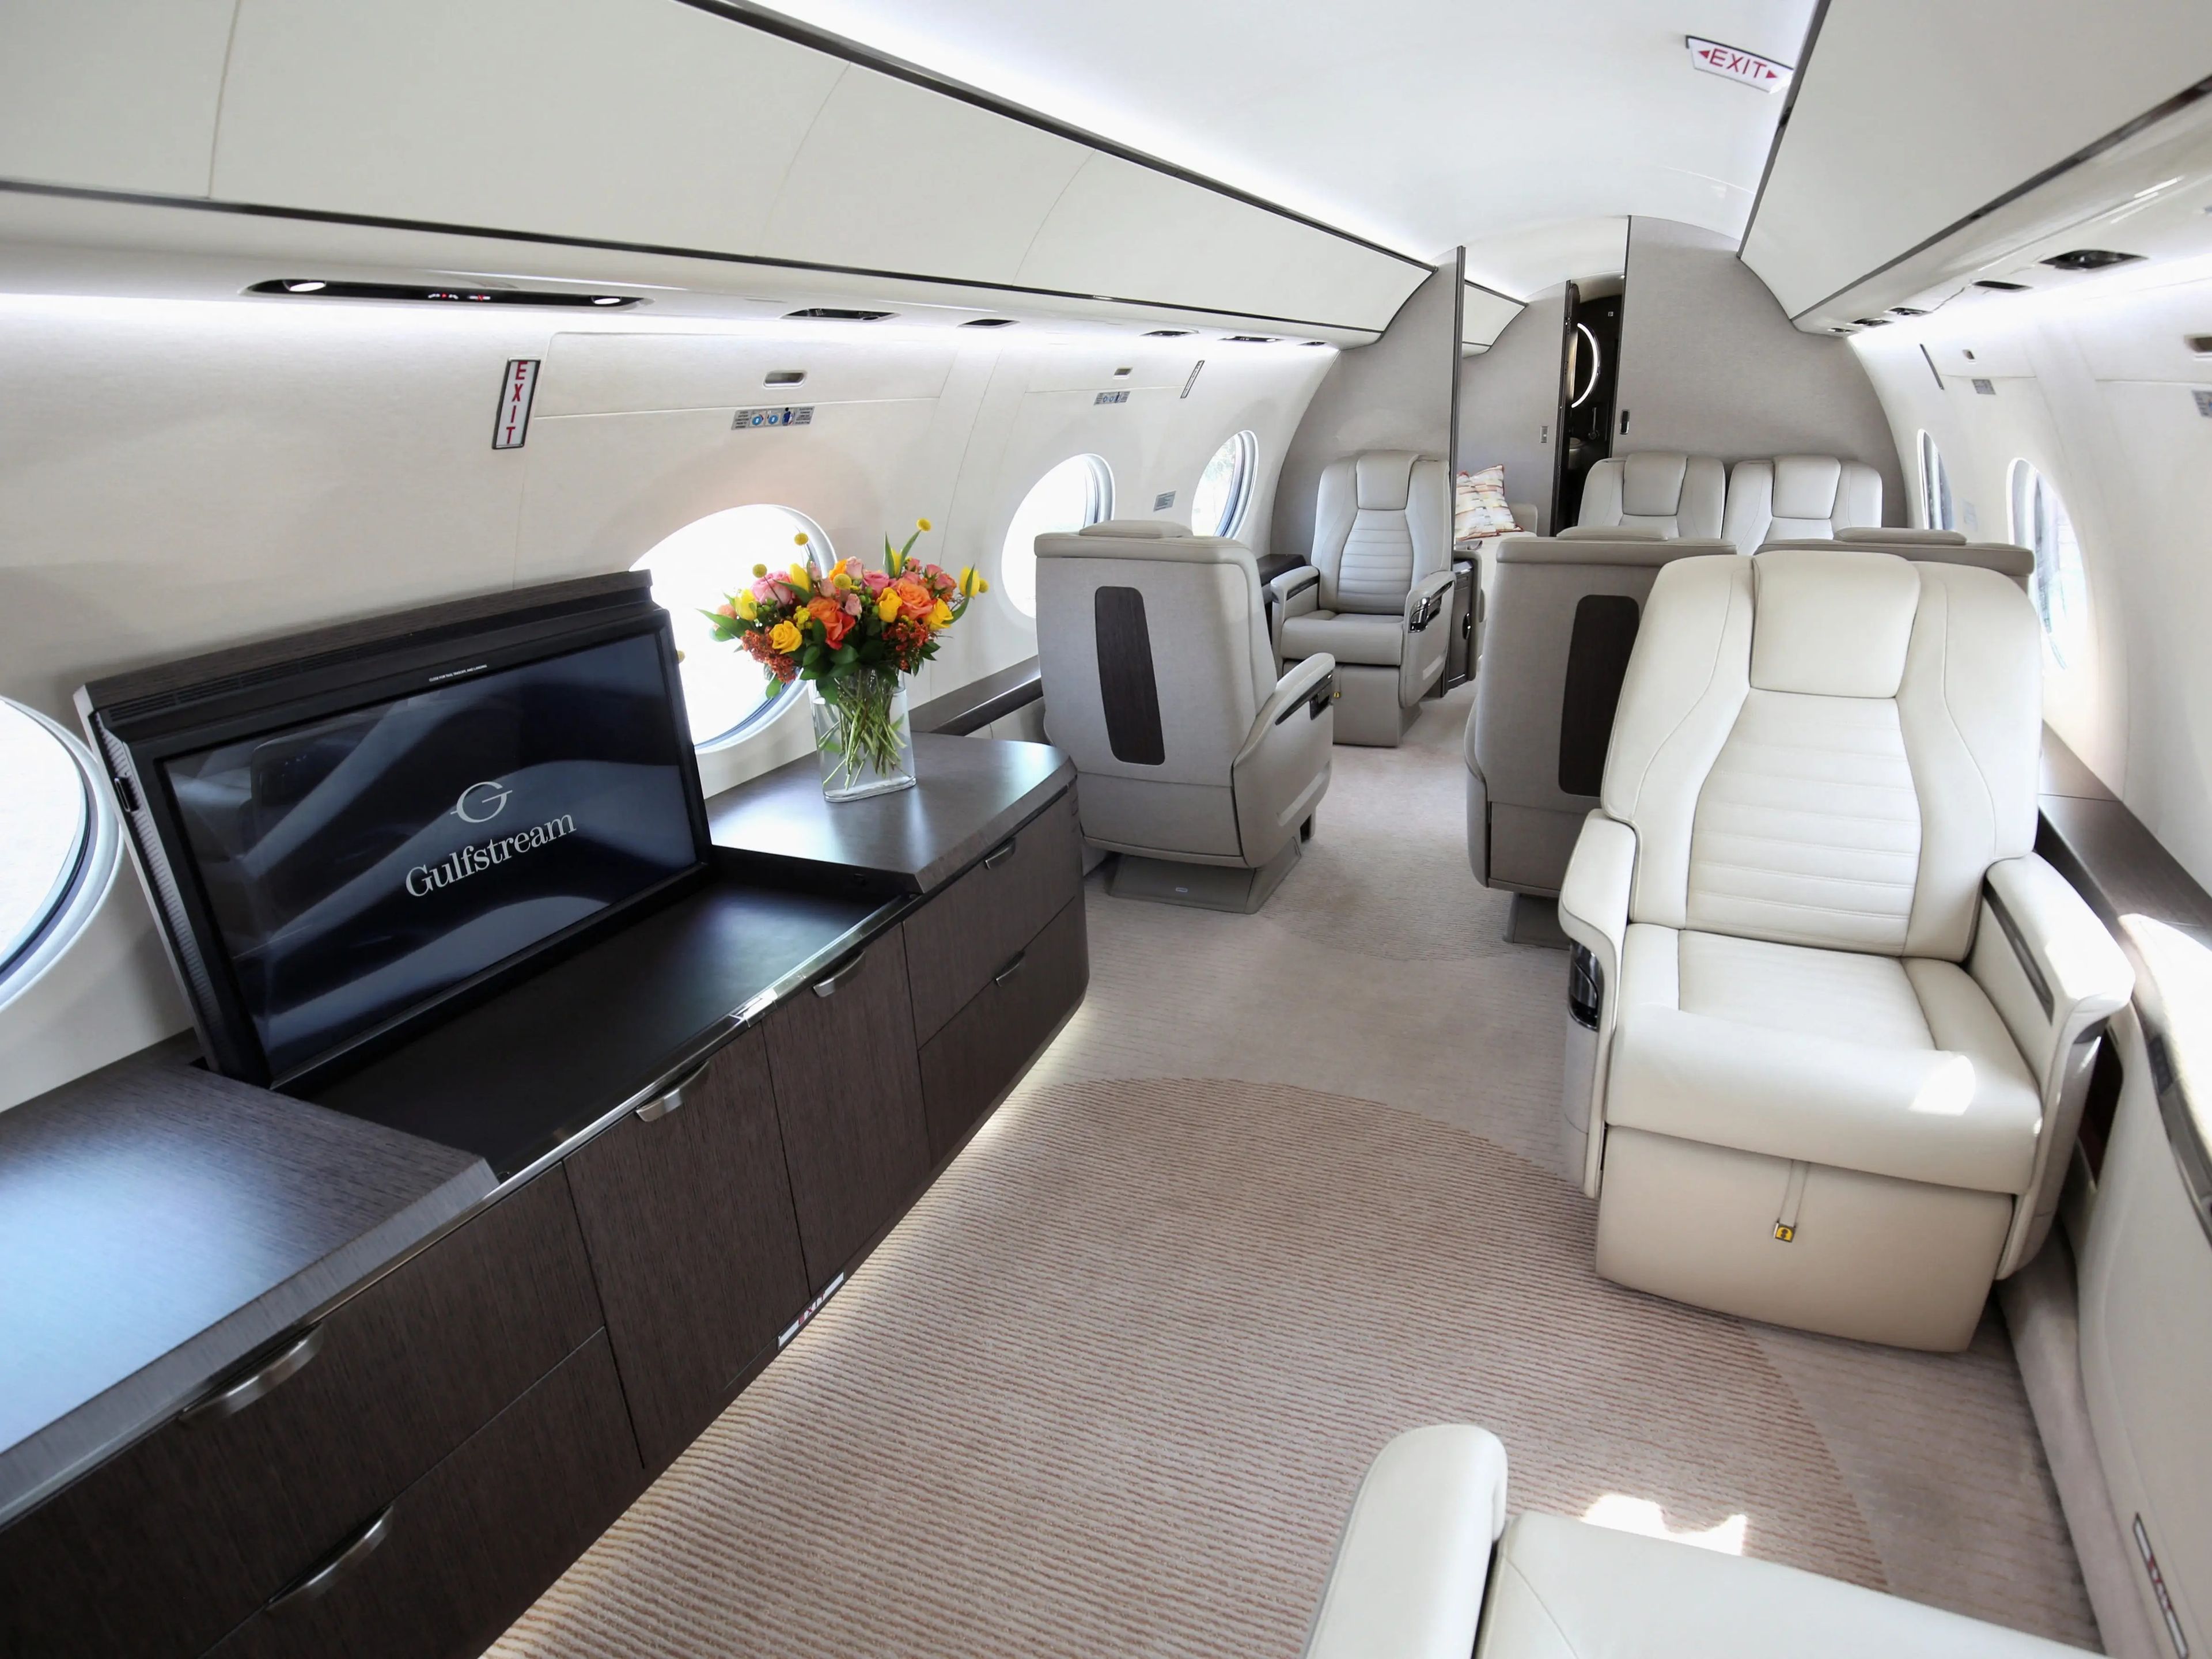 The entertainment suite of the G700.